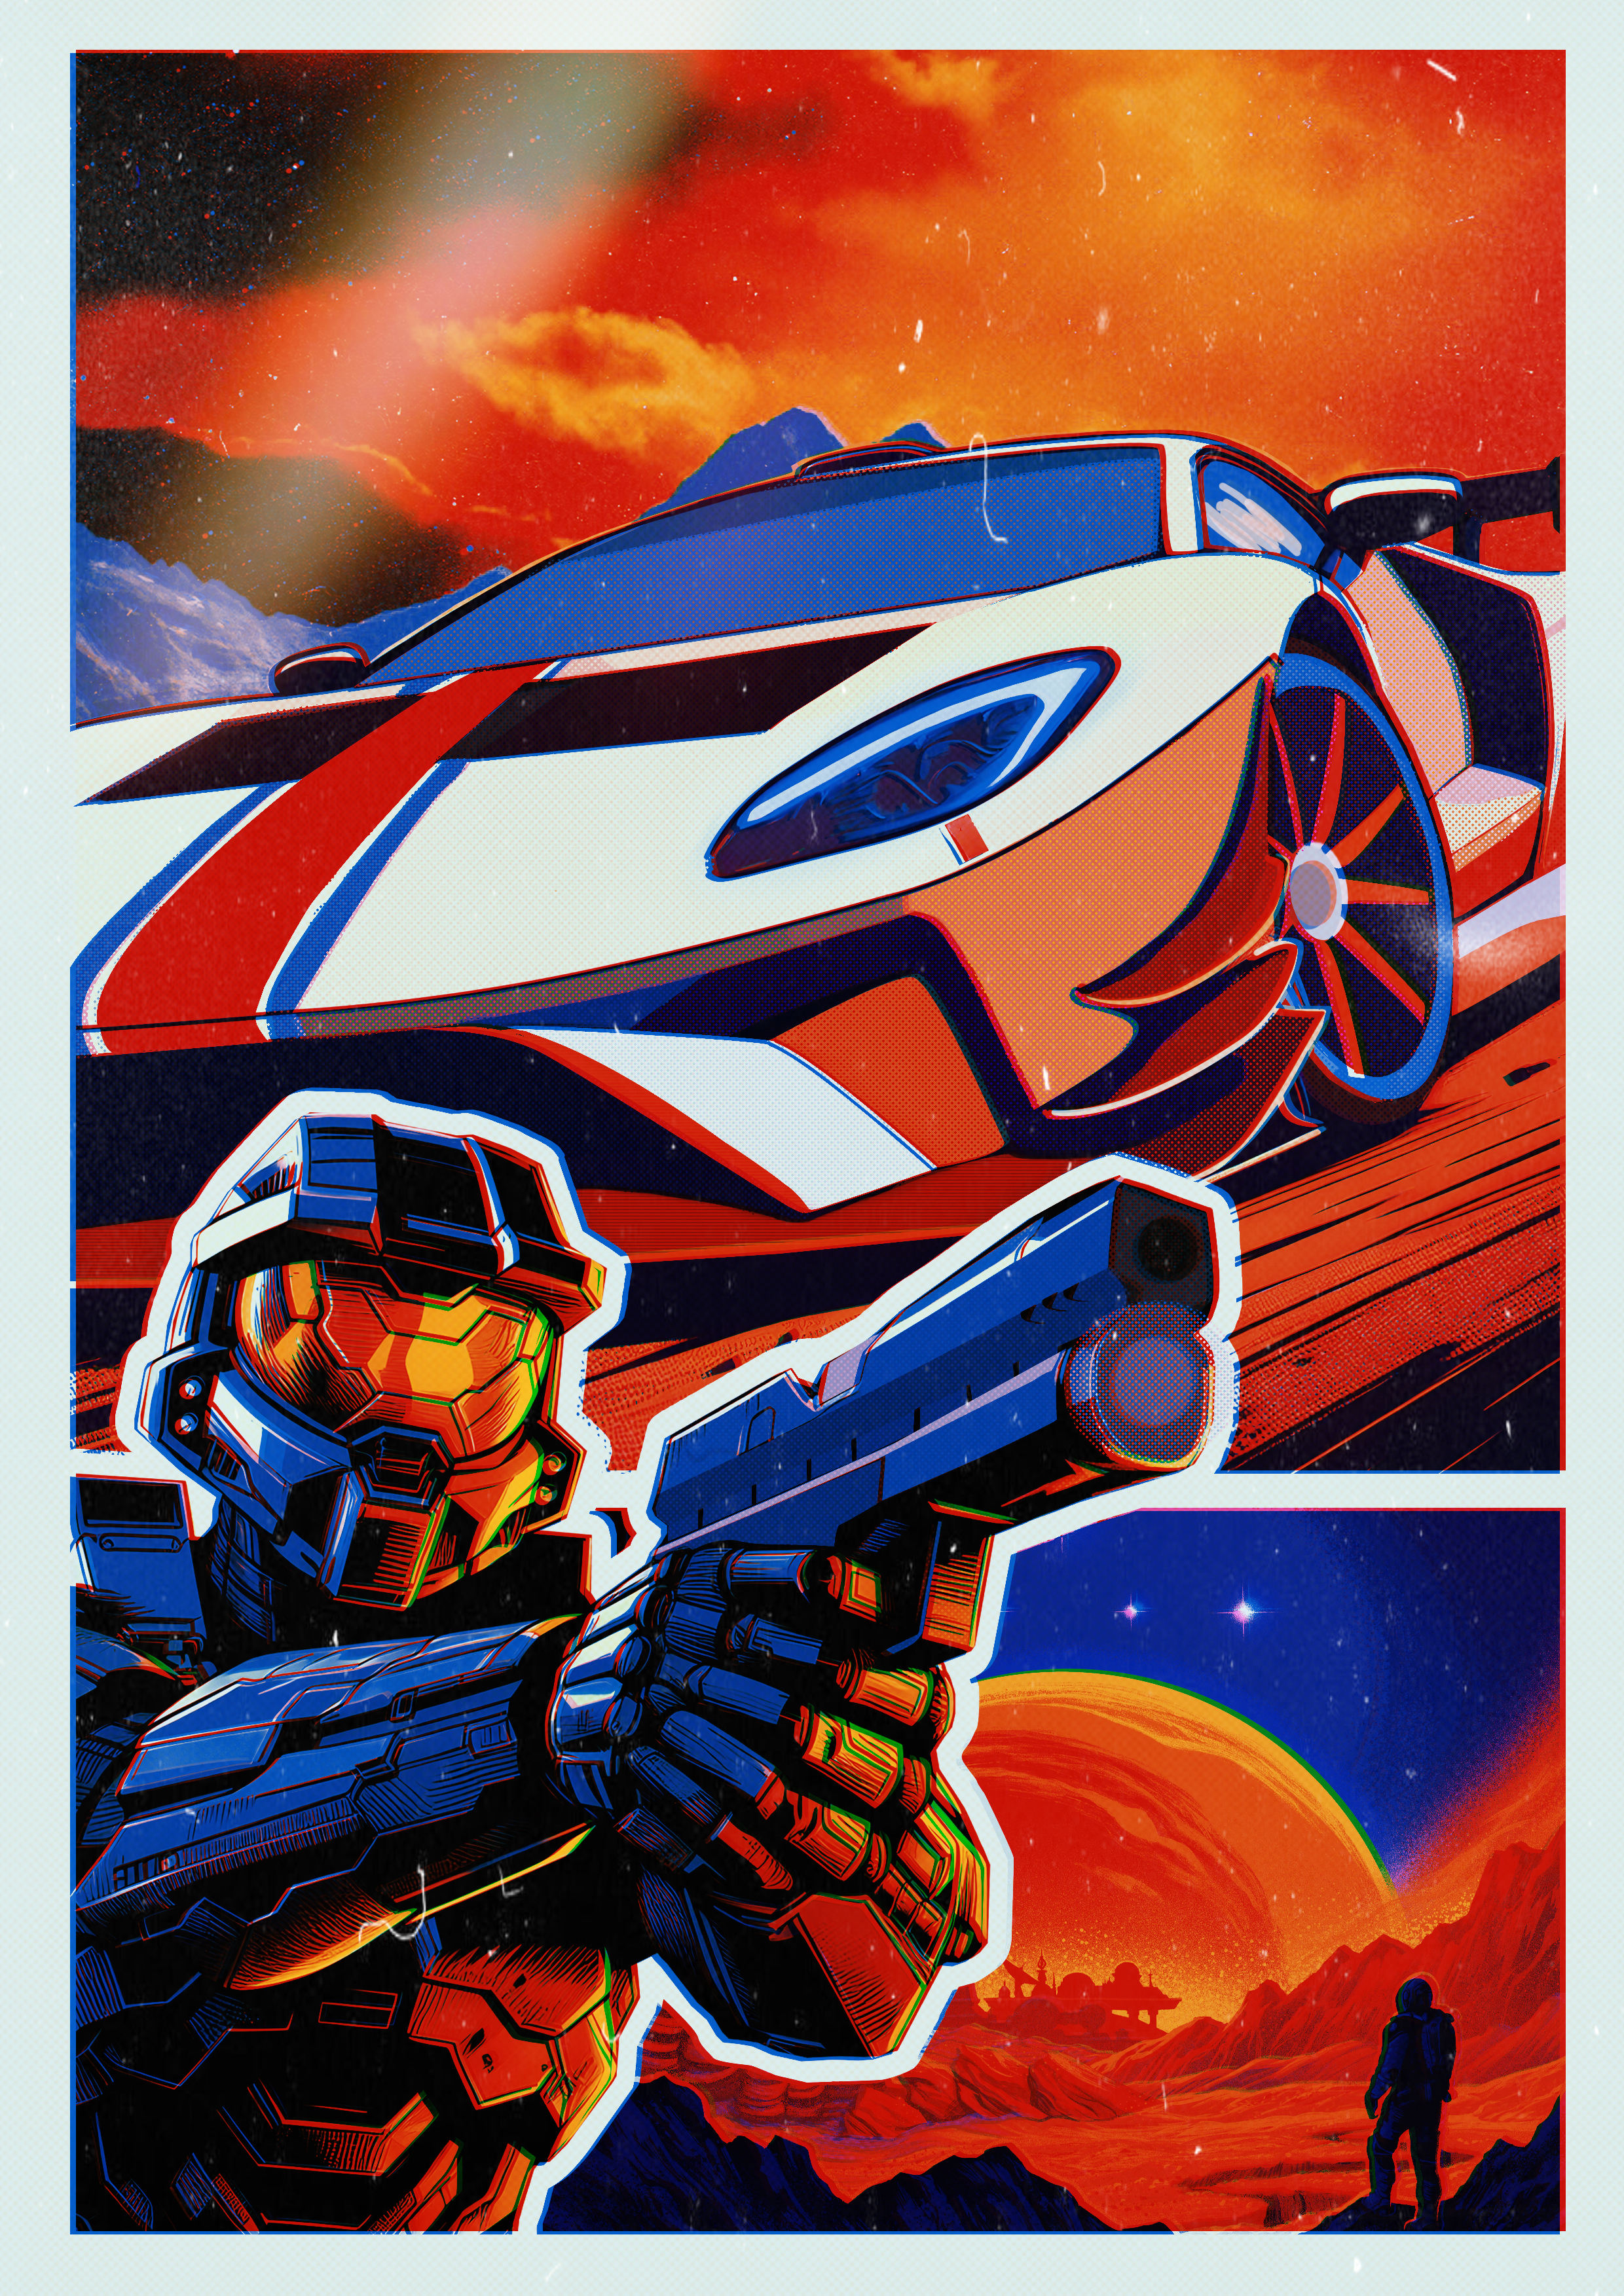 General 2480x3507 Forza Horizon Starfield (video game) Master Chief (Halo) landscape space orange sky stars mountains Speed Design Xbox digital art portrait display gun boys with guns aiming frontal view vehicle car Halo Infinite video games